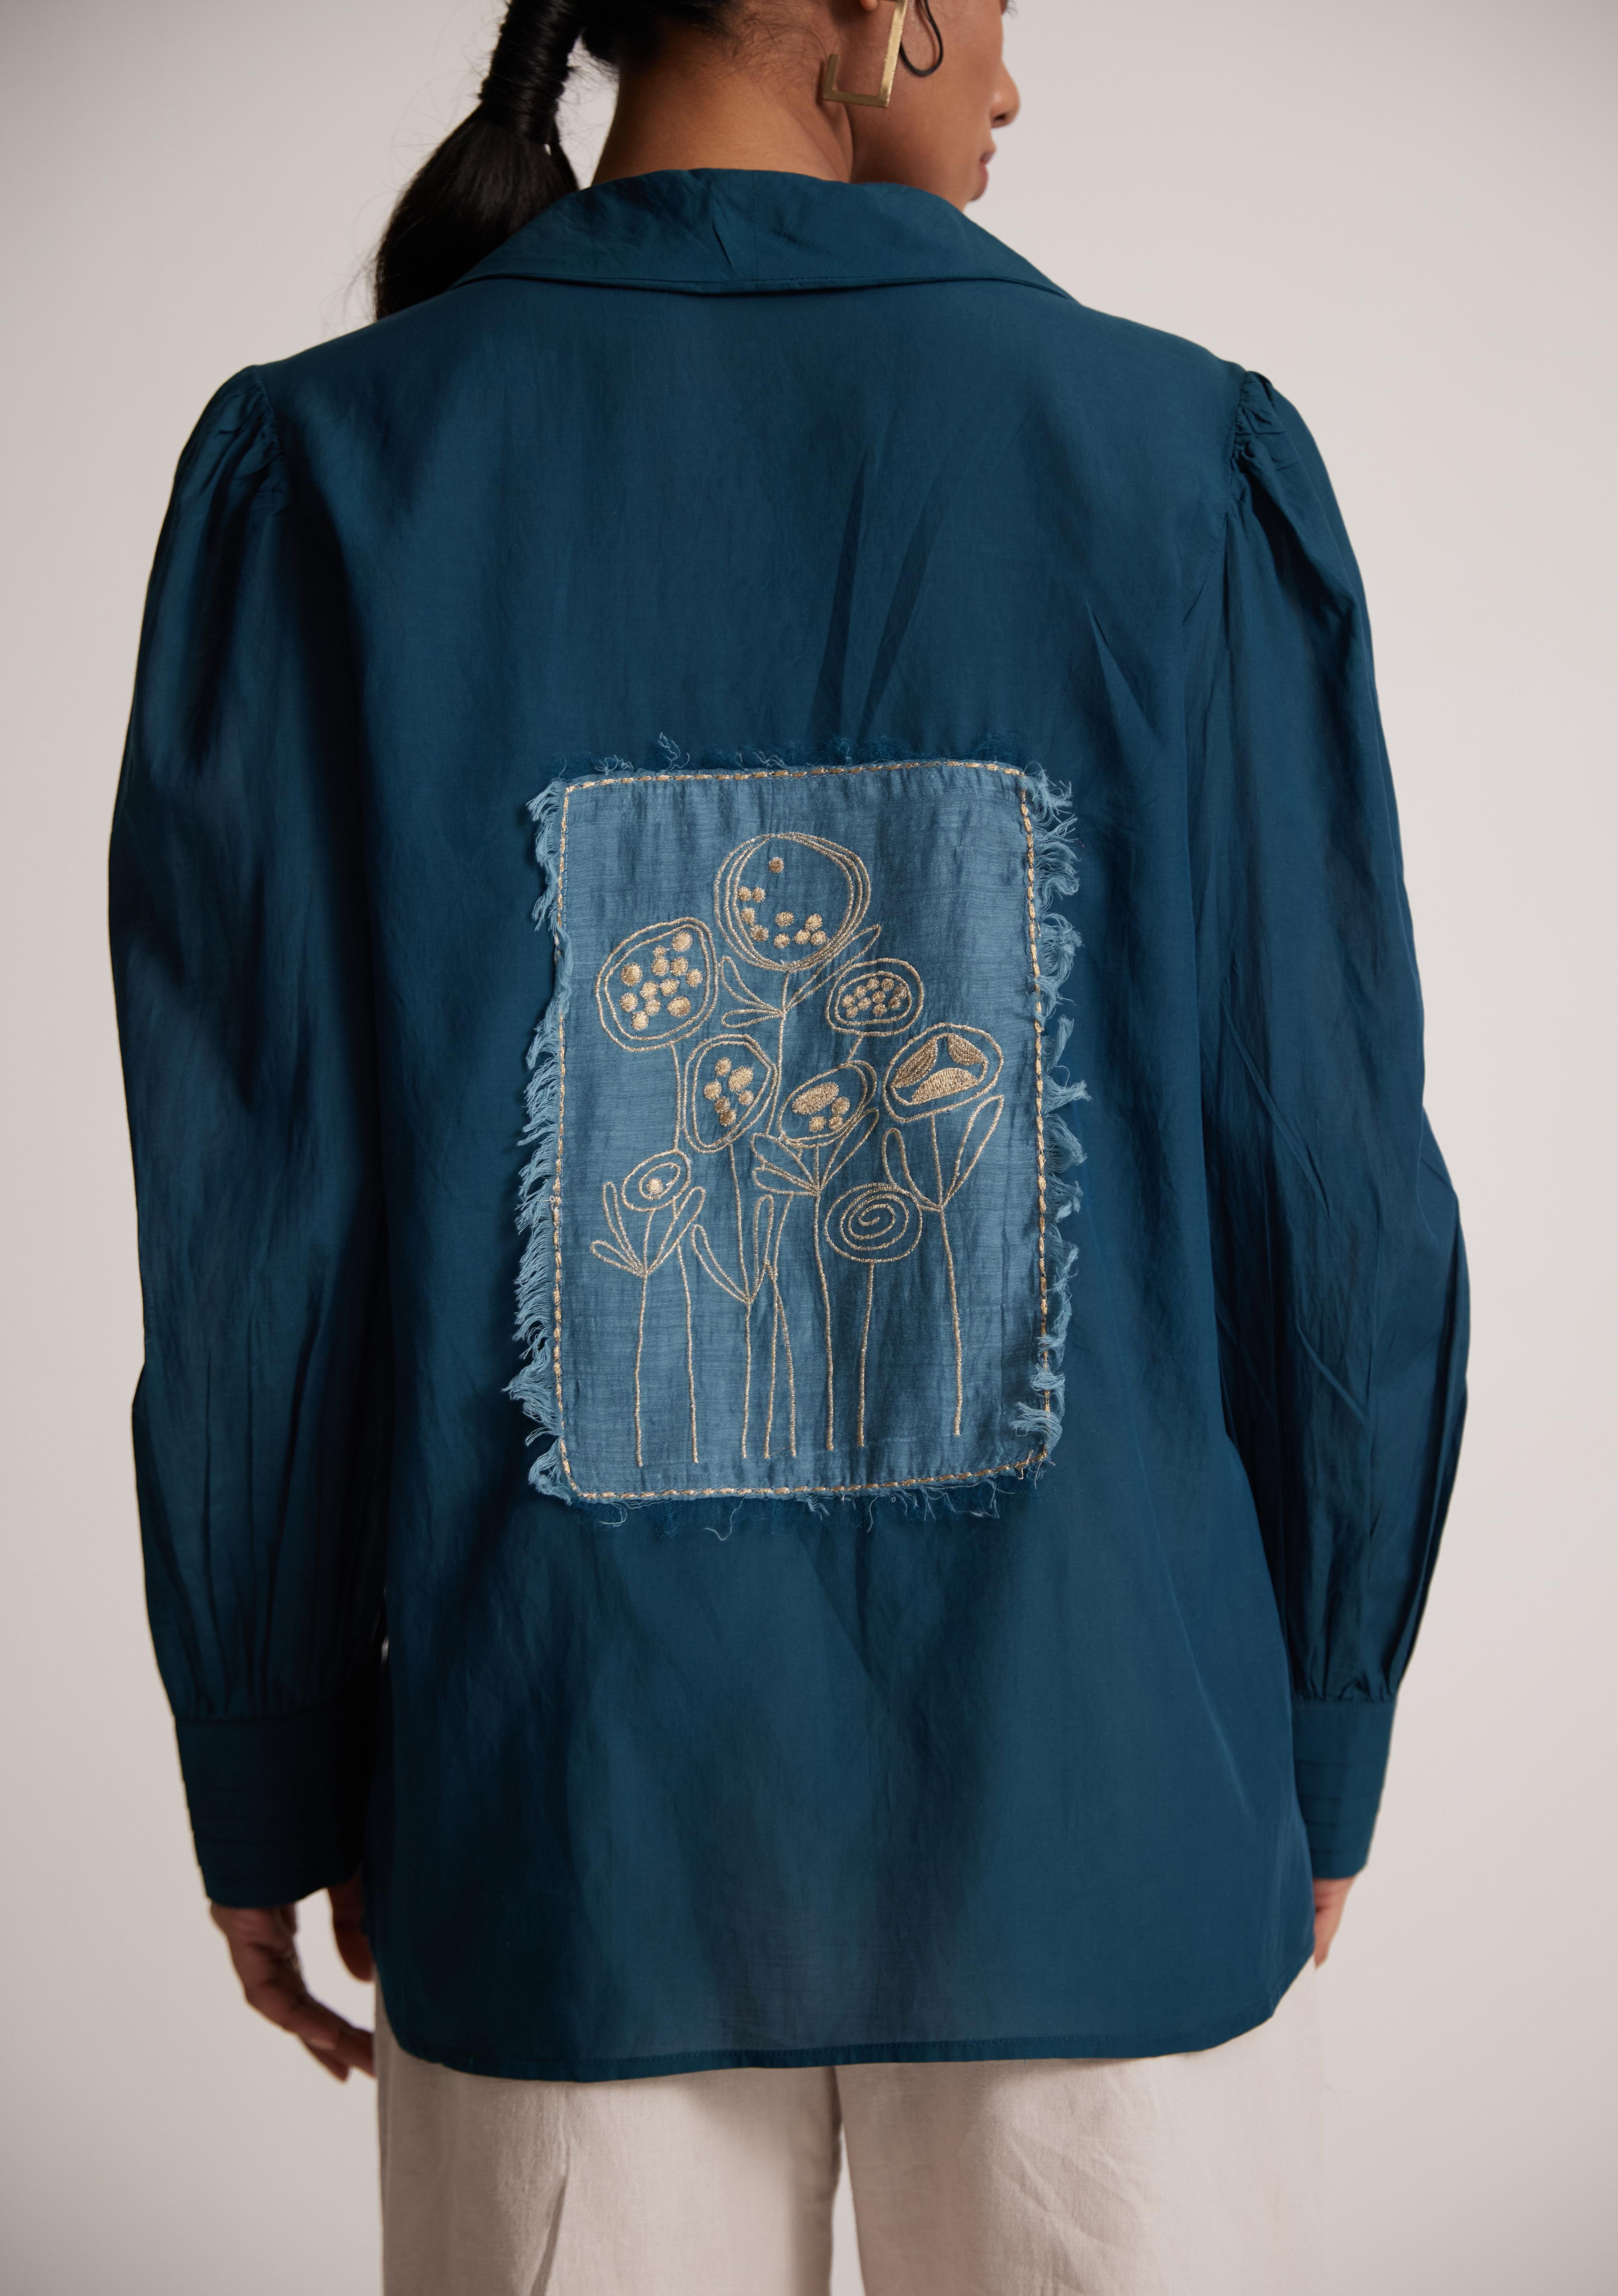 Teal Cotton Shirt with Pleated Cuff and Zari Embroidered patch on Front and Back - Western Era  Embroidery